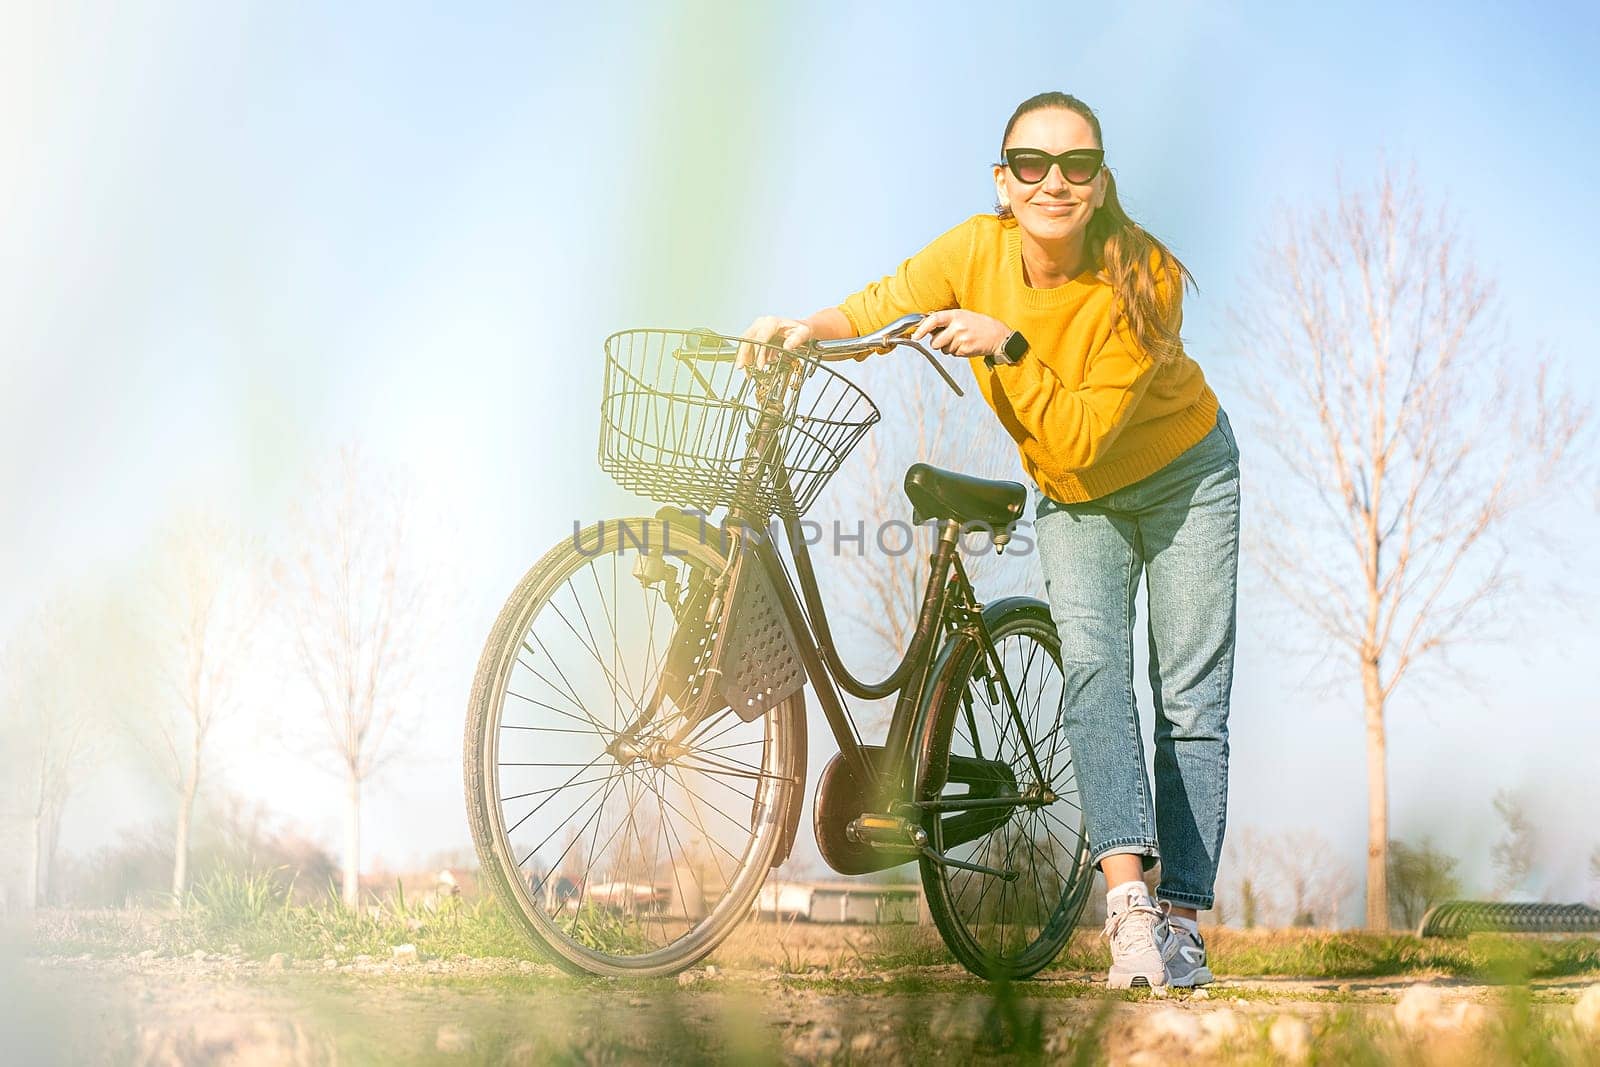 Beautiful young woman on bike in park in spring by Annavish